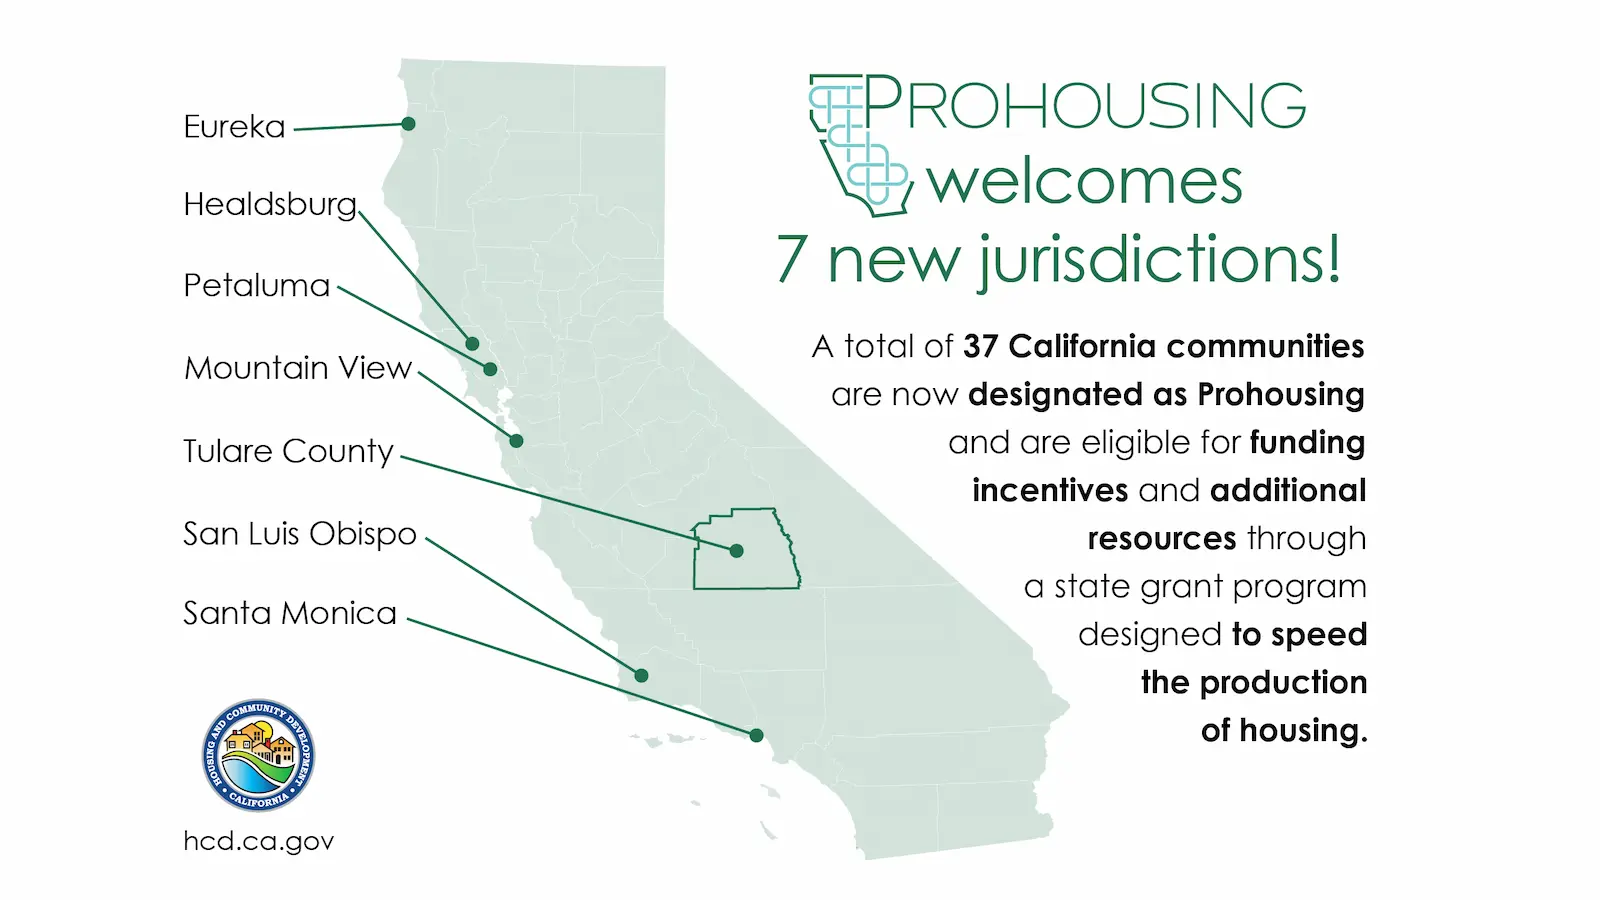 map of California with prohousing cities. Text reads: Prohousing welcomes 7 jurisdictions. A total of 37 California communities are now designated as prohousing and are eligible for funding incentives and additional resources through a state grant program designed to speed the production of housing.